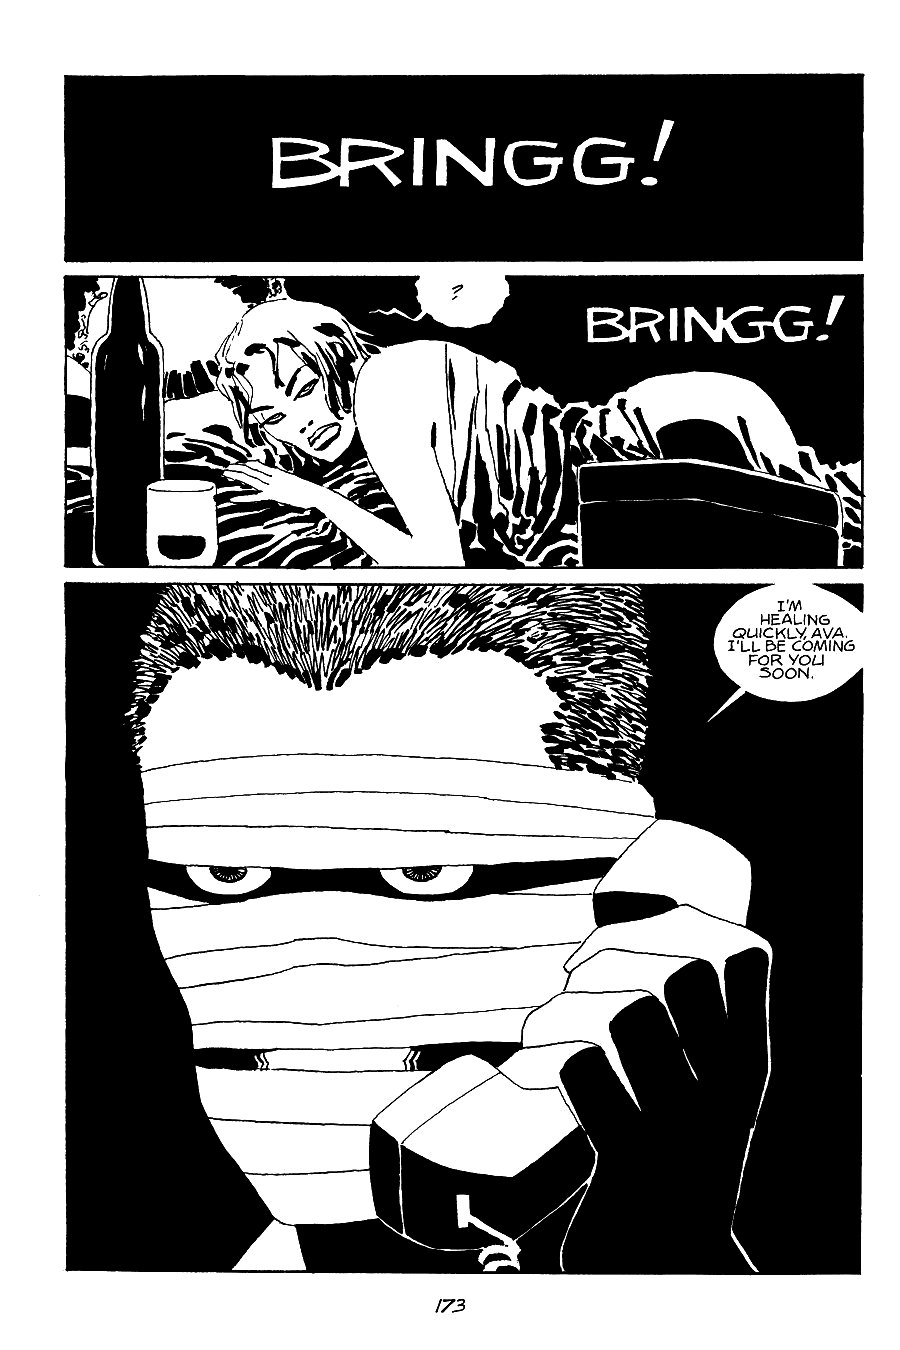 page 173 of sin city 2 the hard goodbye